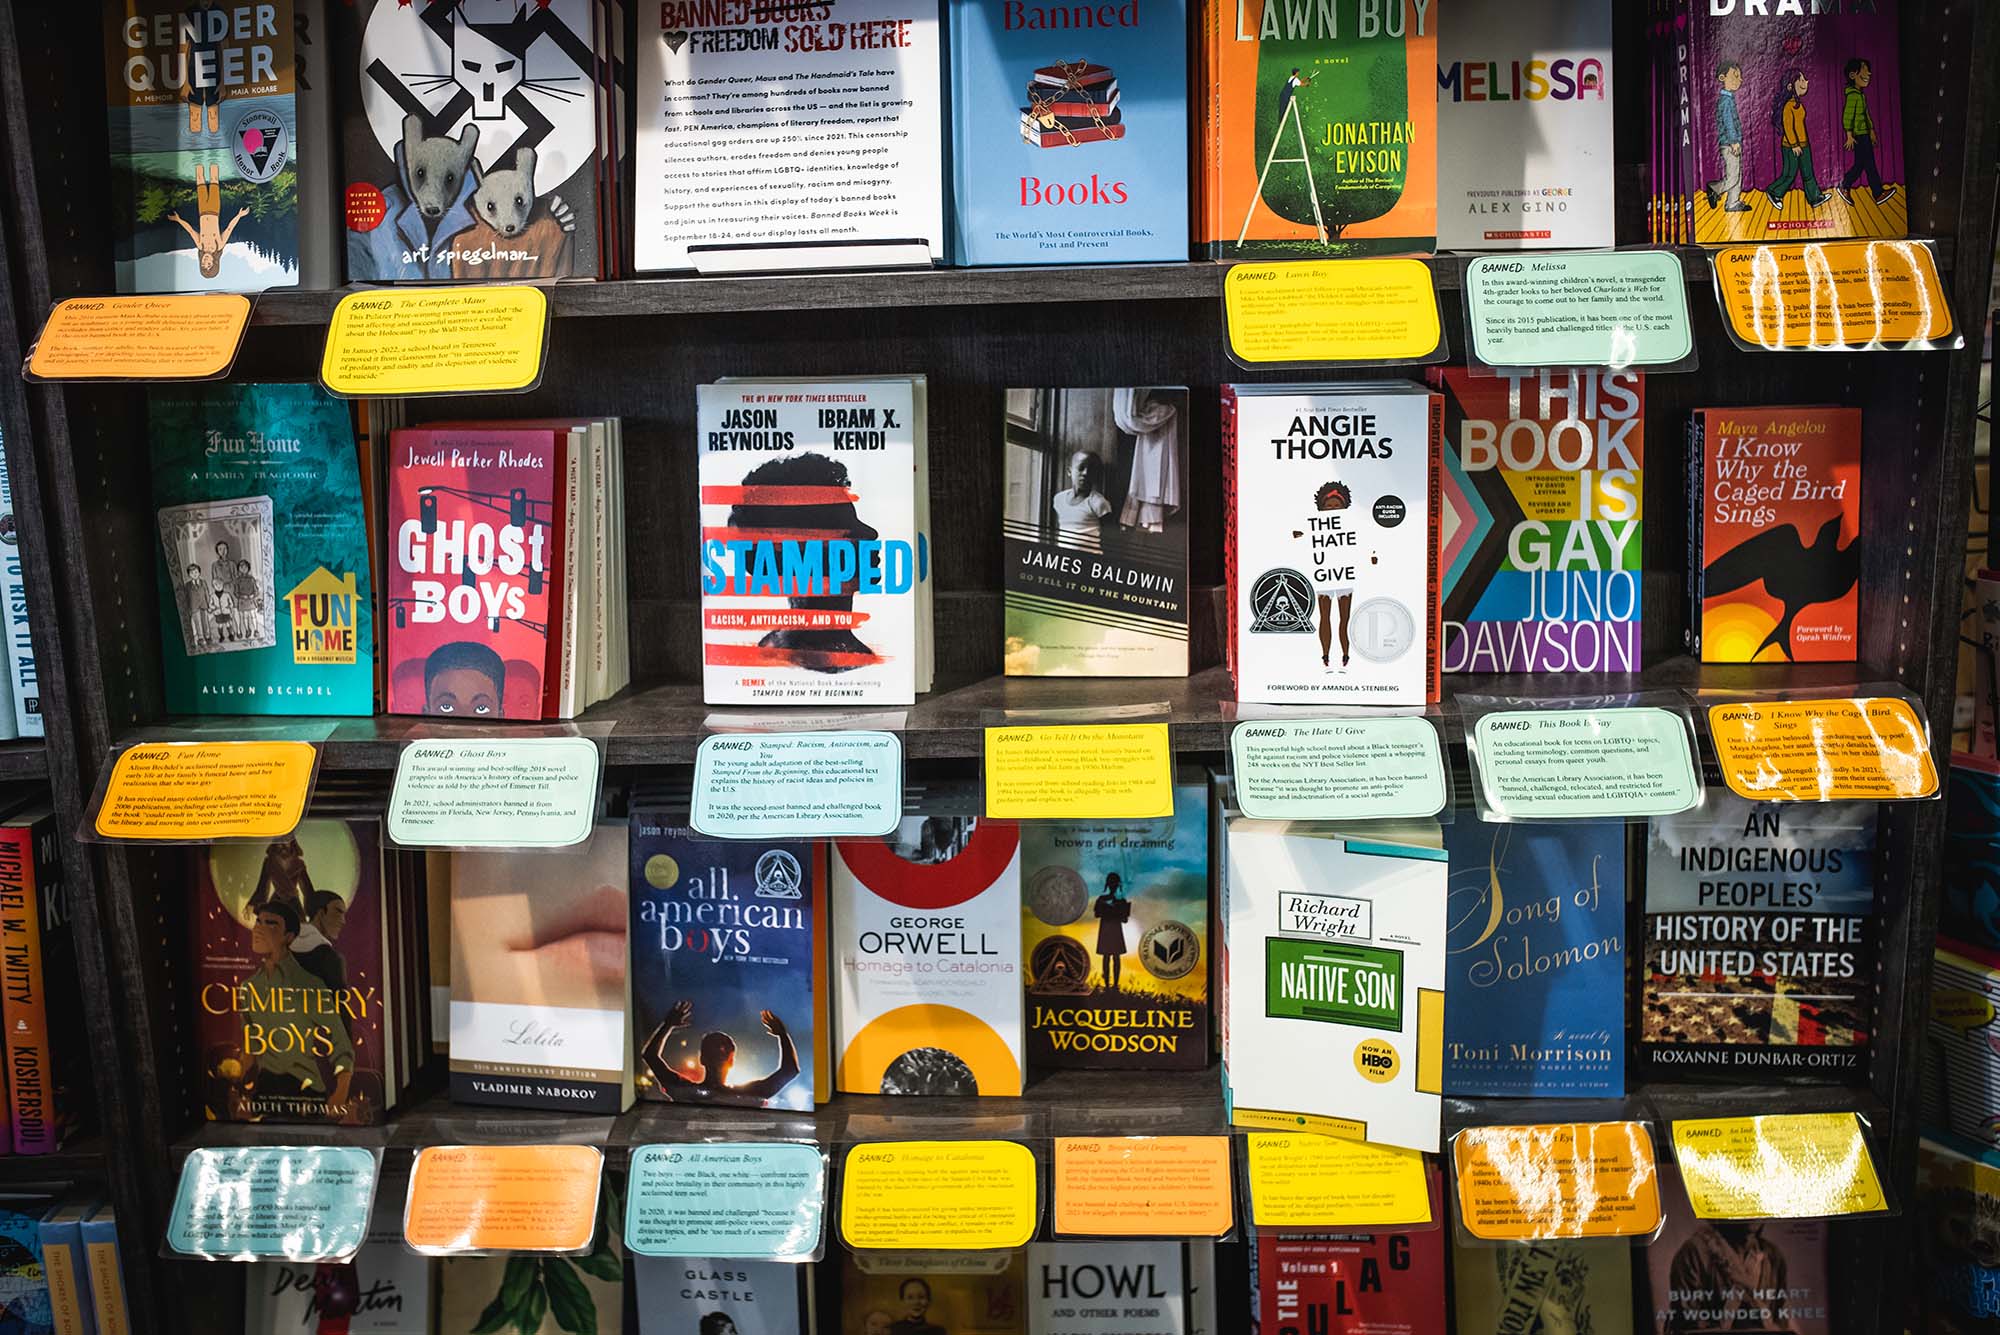 A photo at Brookline Booksmith where banned books are available for purchase. The books displayed have cards explaining when, where, and why the book was banned.